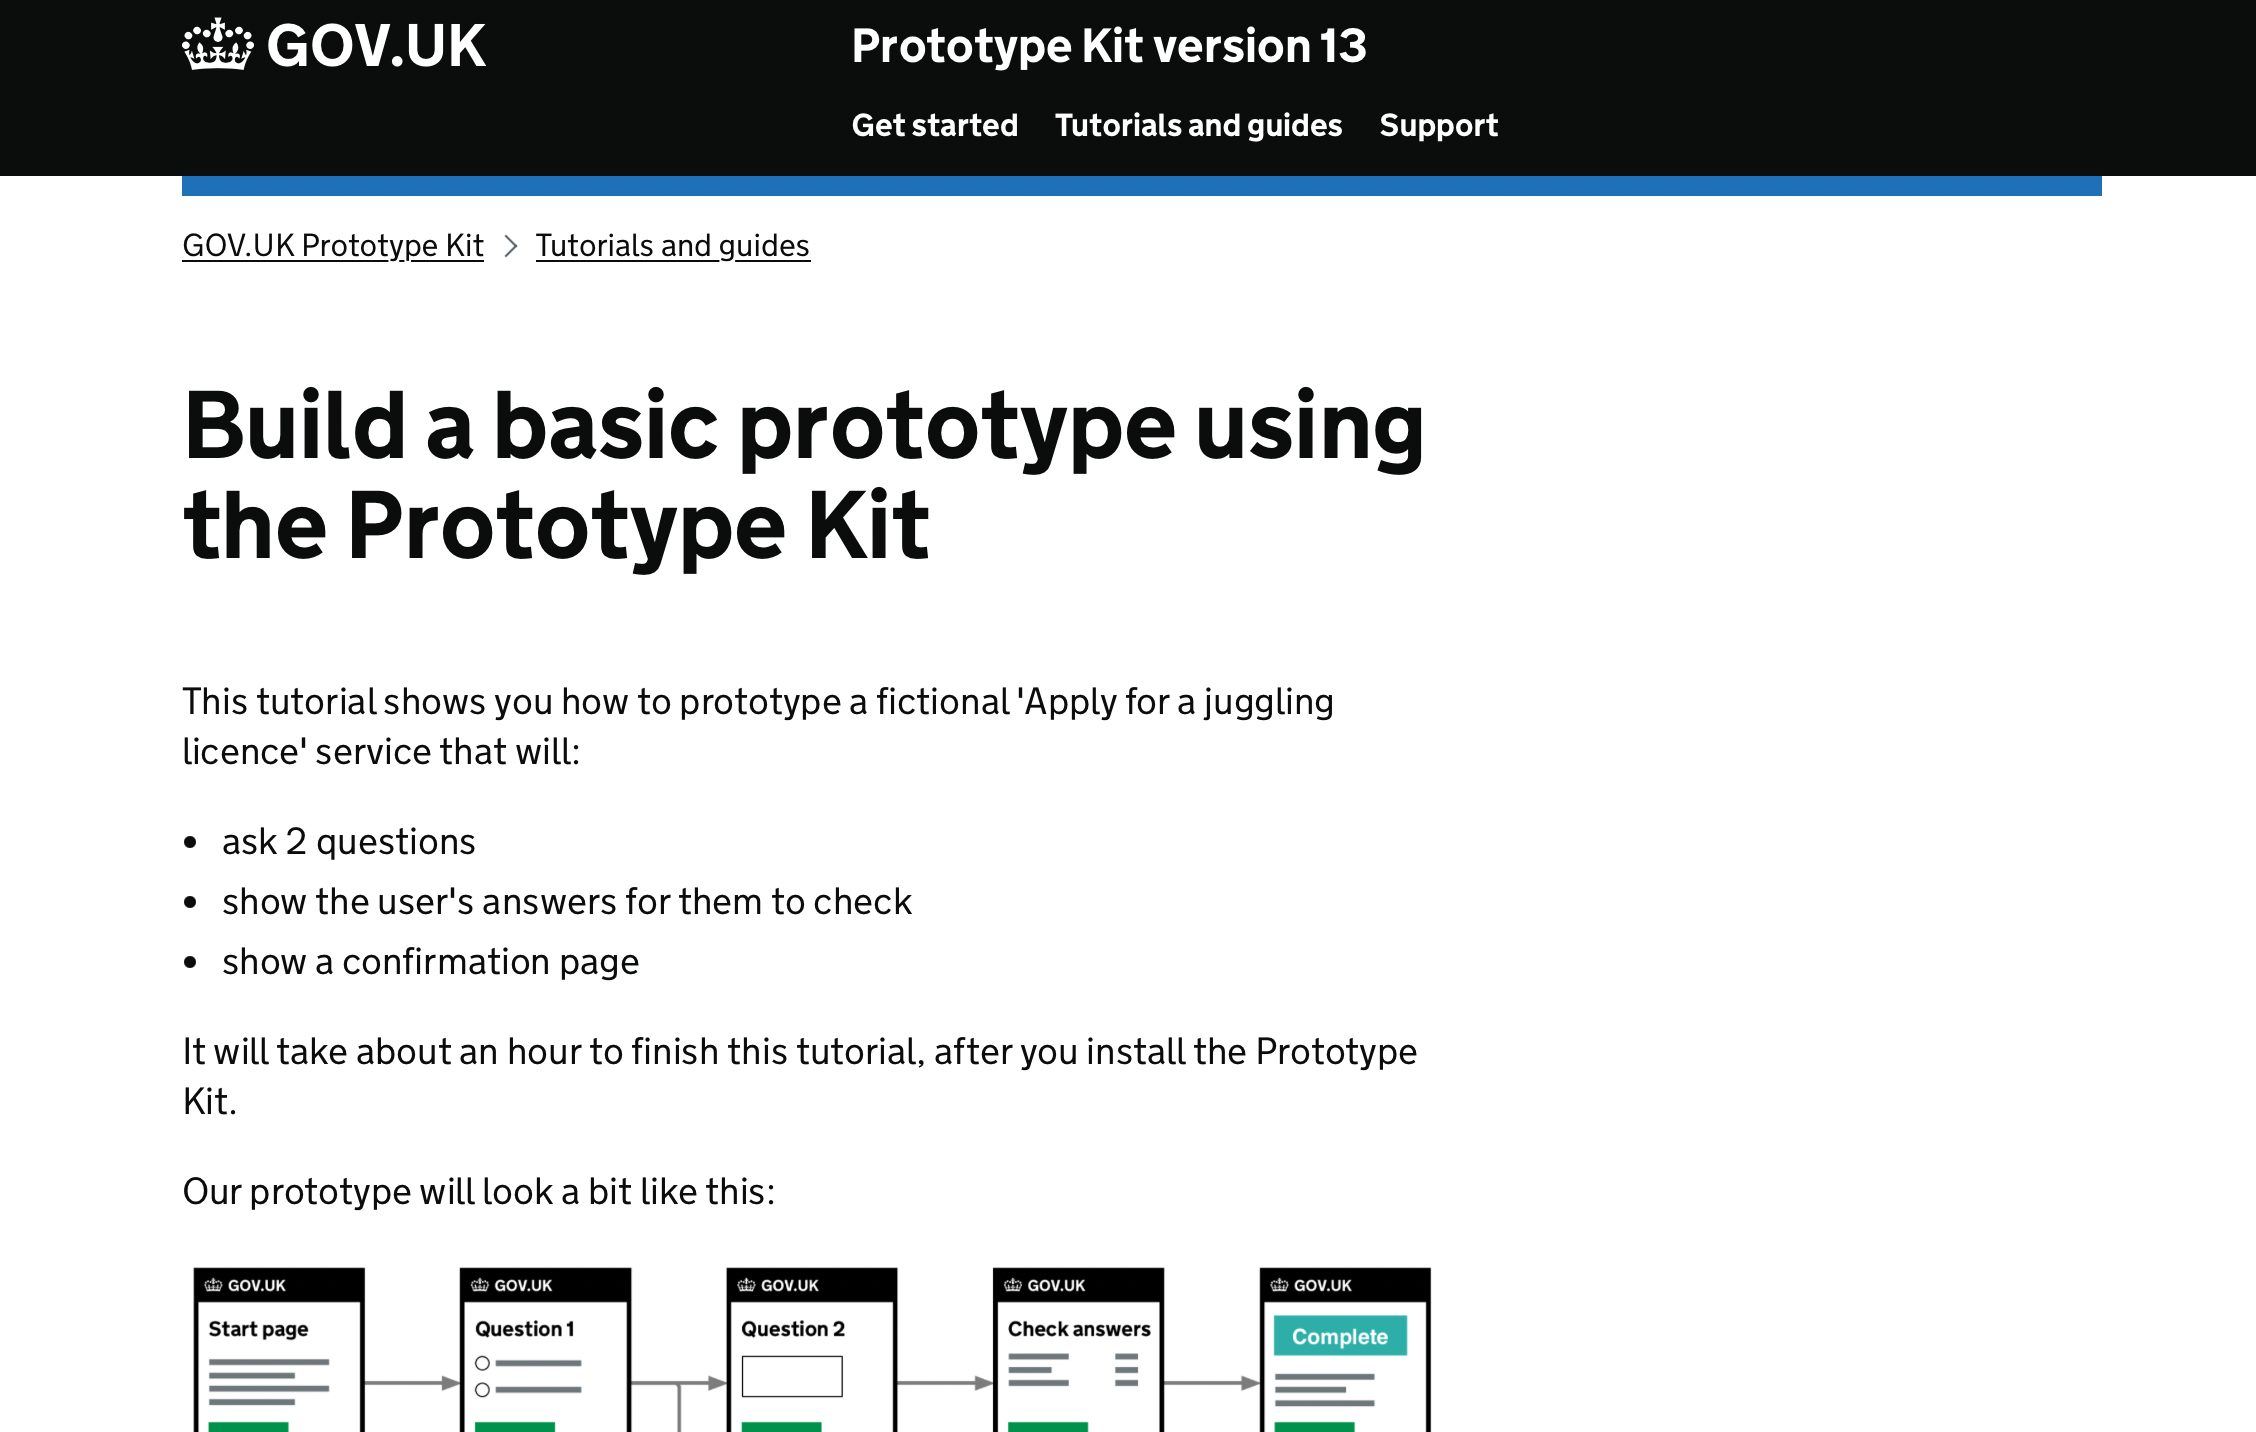 Screenshot. Build a basic prototype using the Prototype Kit. This tutorial shows you how to prototype a fictional 'Apply for a juggling licence' service that will: ask 2 questions, show the user's answers for them to check, show a confirmation page. It will take about an hour to finish this tutorial, after you install the Prototype Kit. Our prototype will look a bit like this: flow diagram of 5 pages